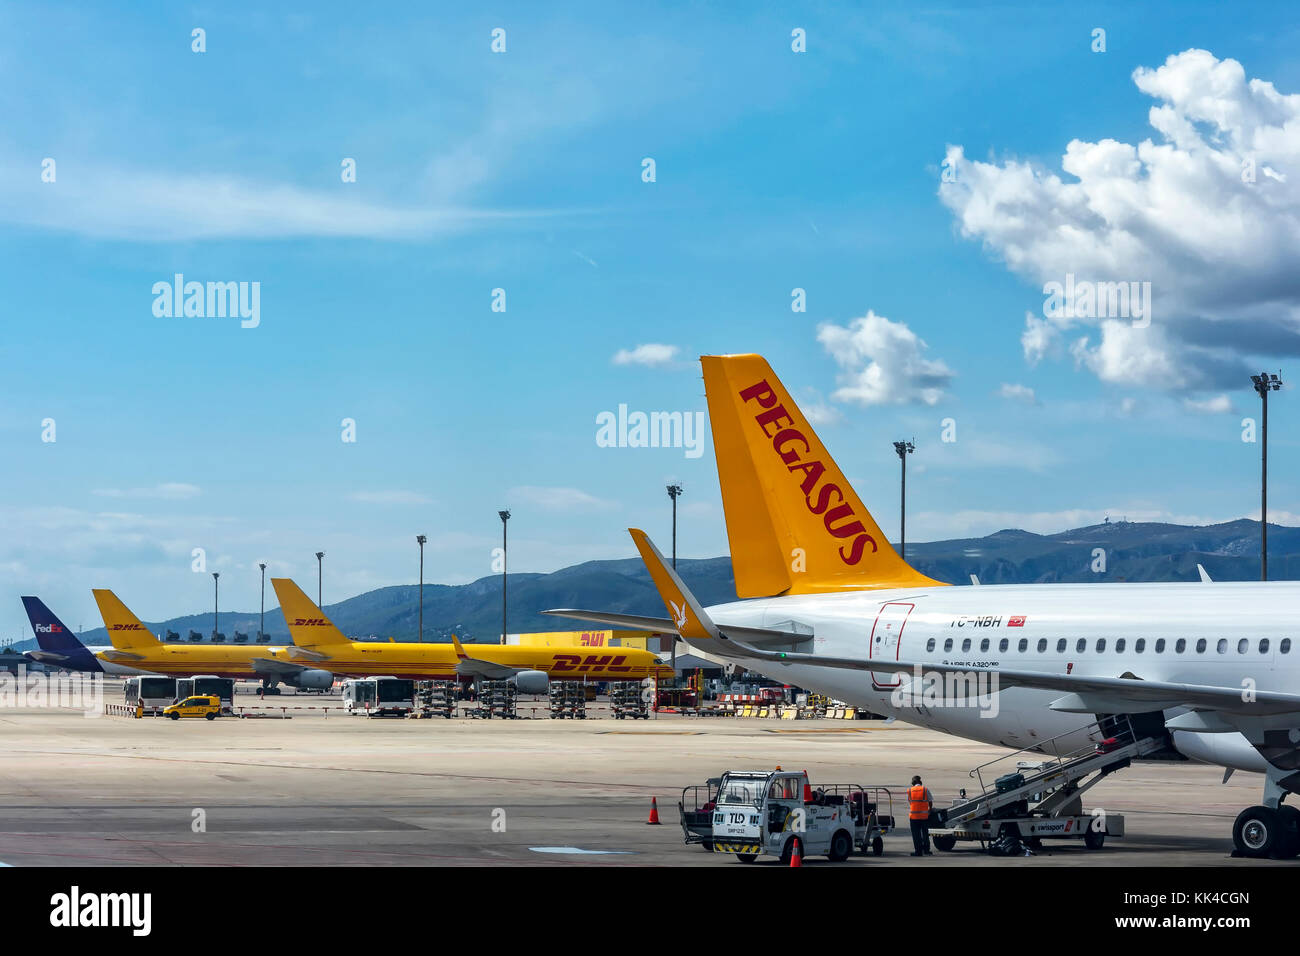 Spain, Barcelona - 26.09.2017: Unloading of international postal services at the airport Stock Photo